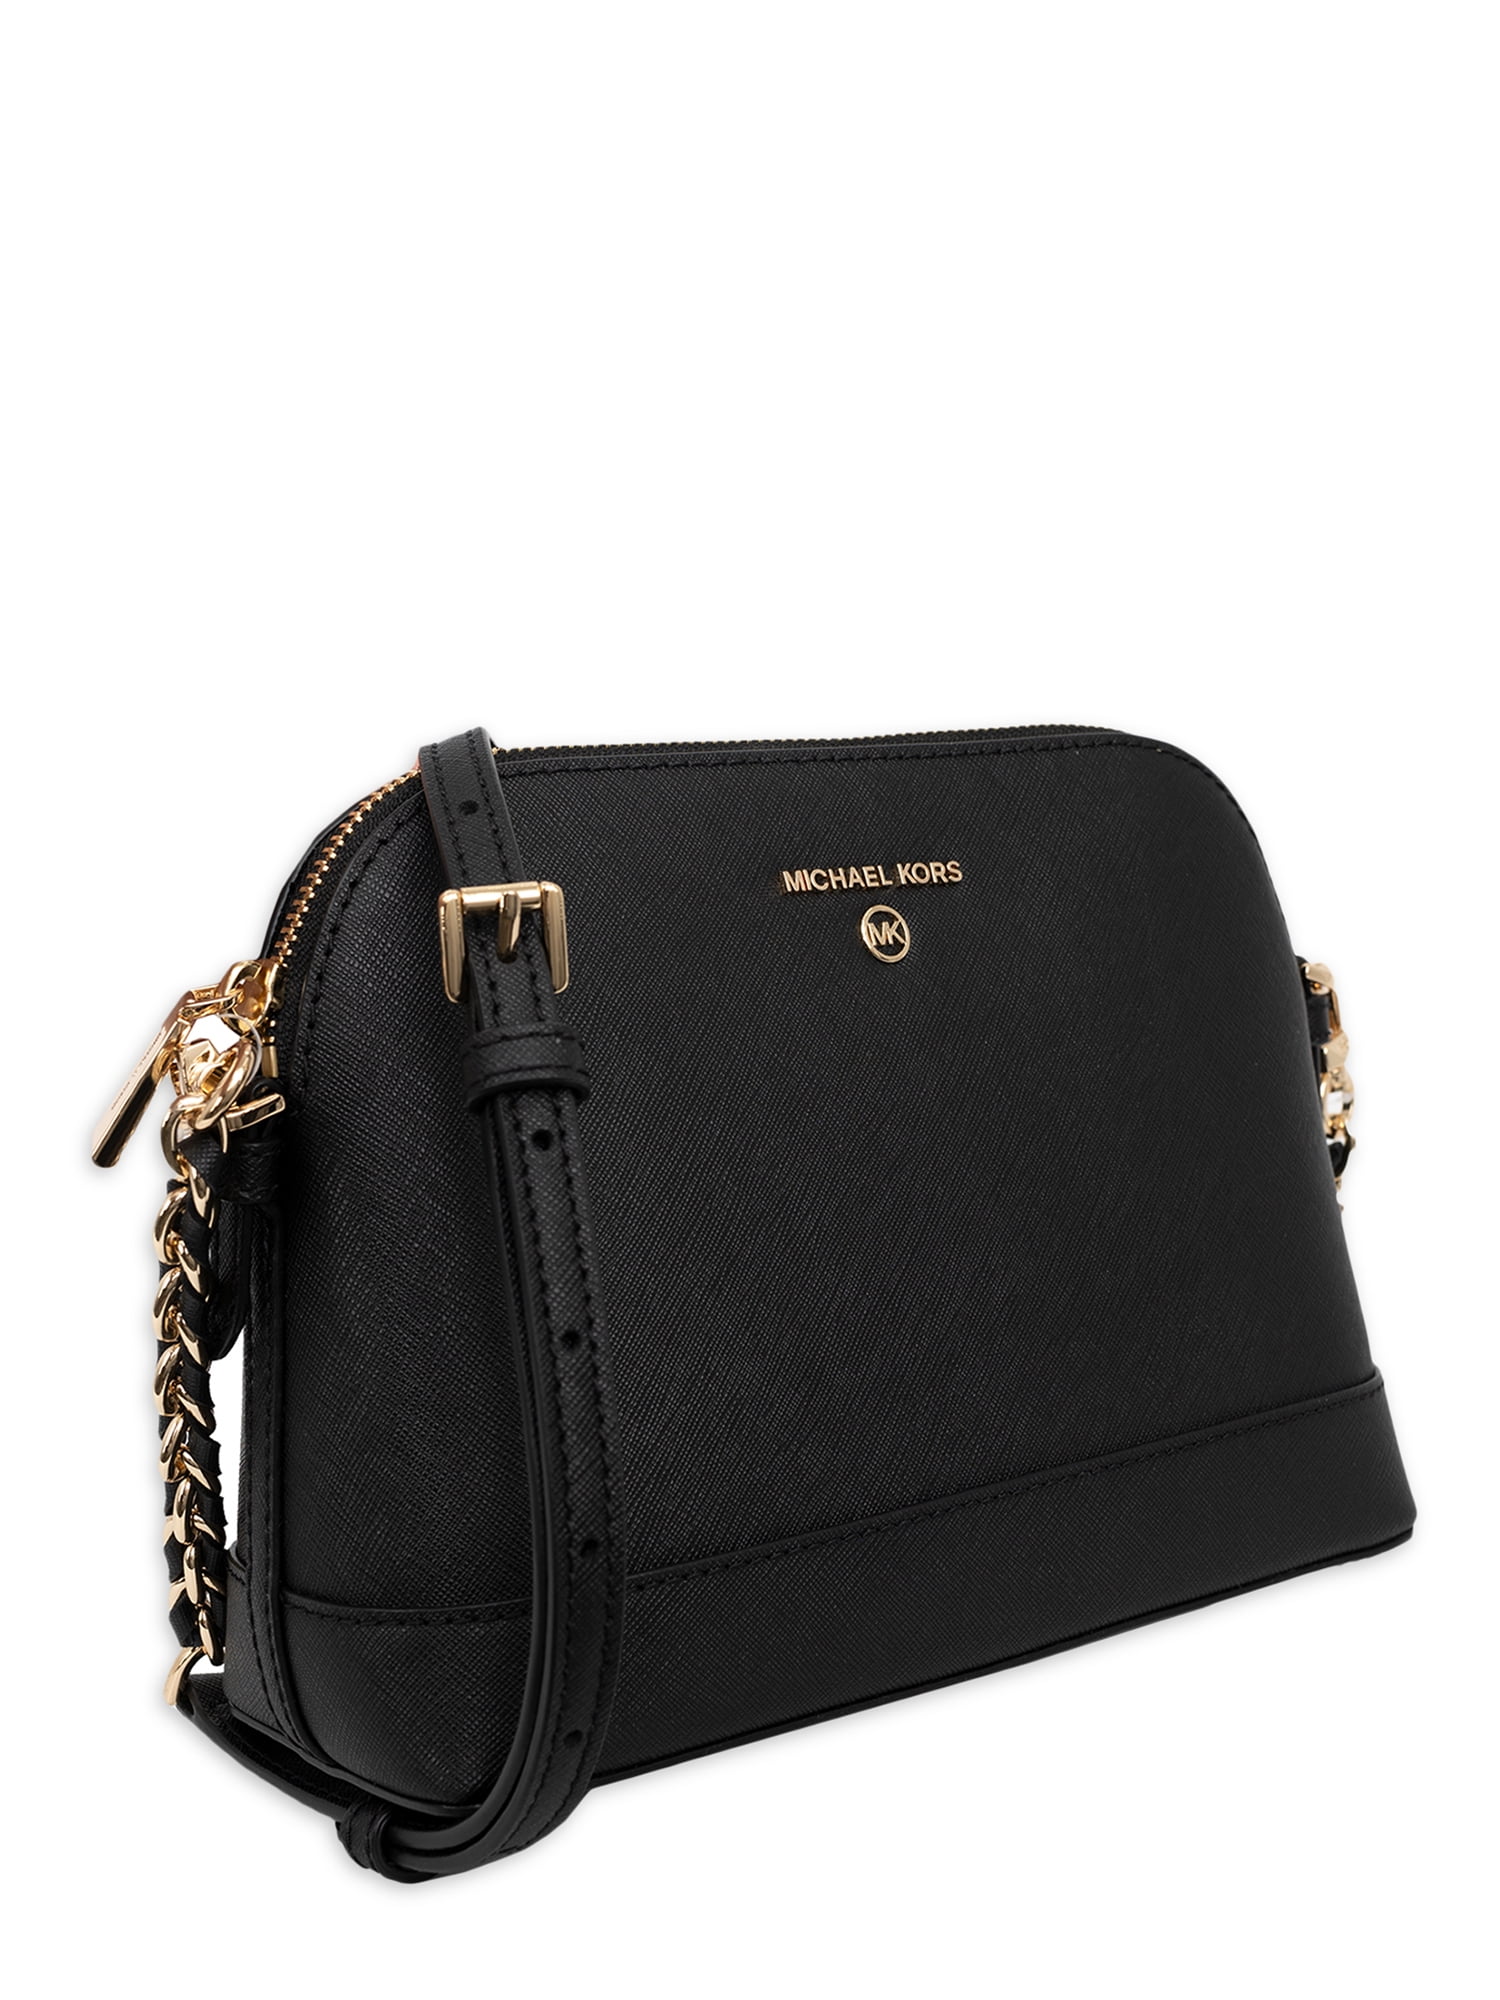 Michael Kors Large Saffiano Leather Dome Crossbody Bag in Black